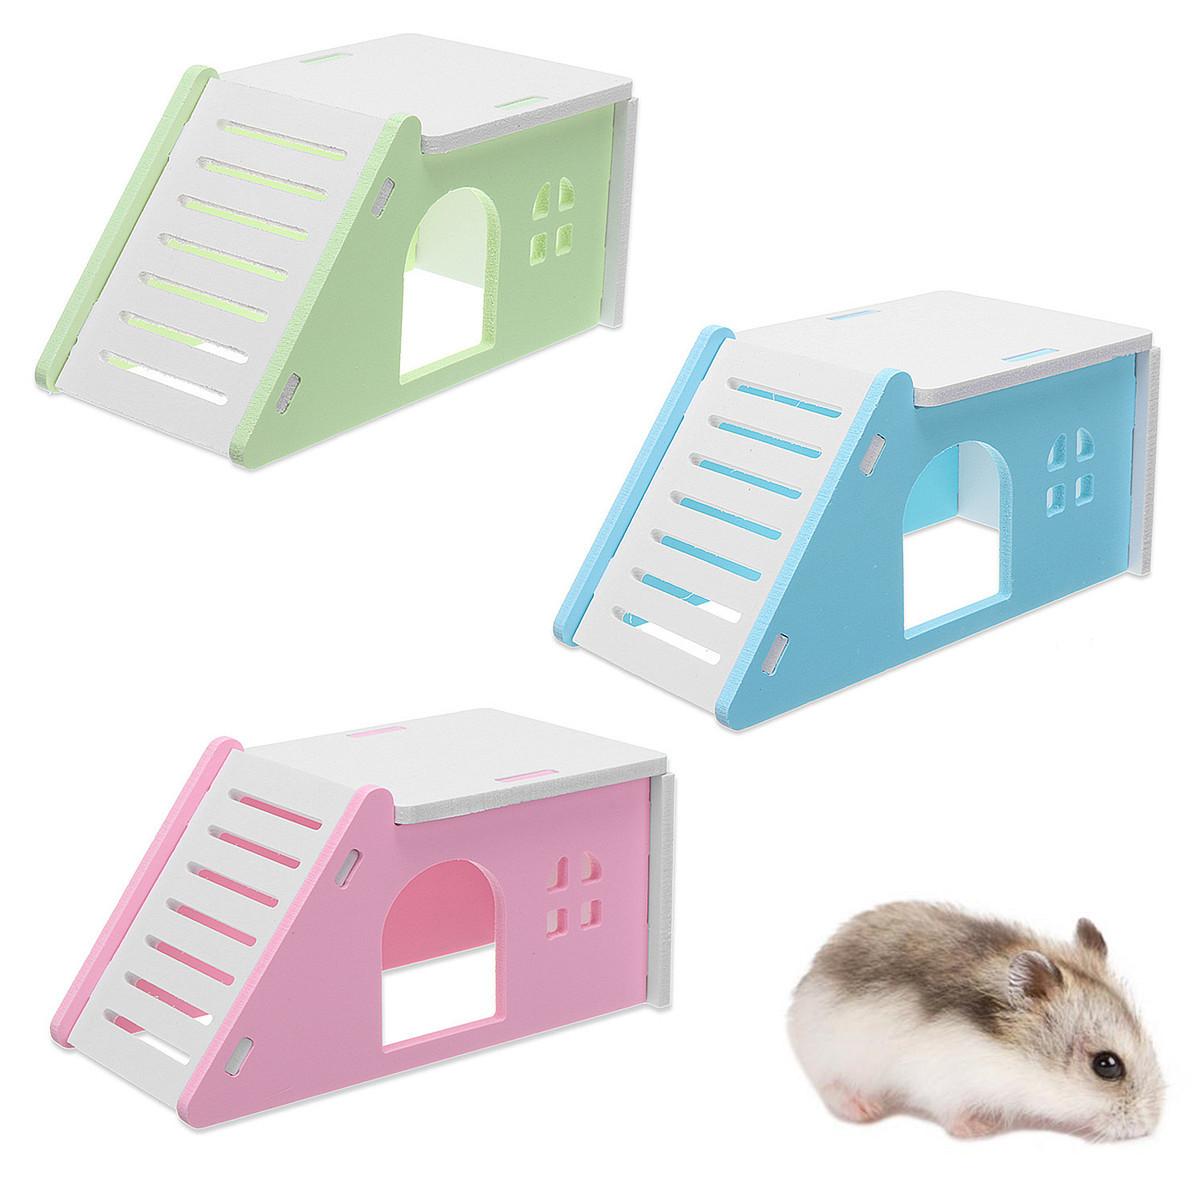 Pet-Mouse-Hamster-House-Villa-Cage-Bed-Liftable-Ladder-Window-Nest-Exercise-Toy-1207141